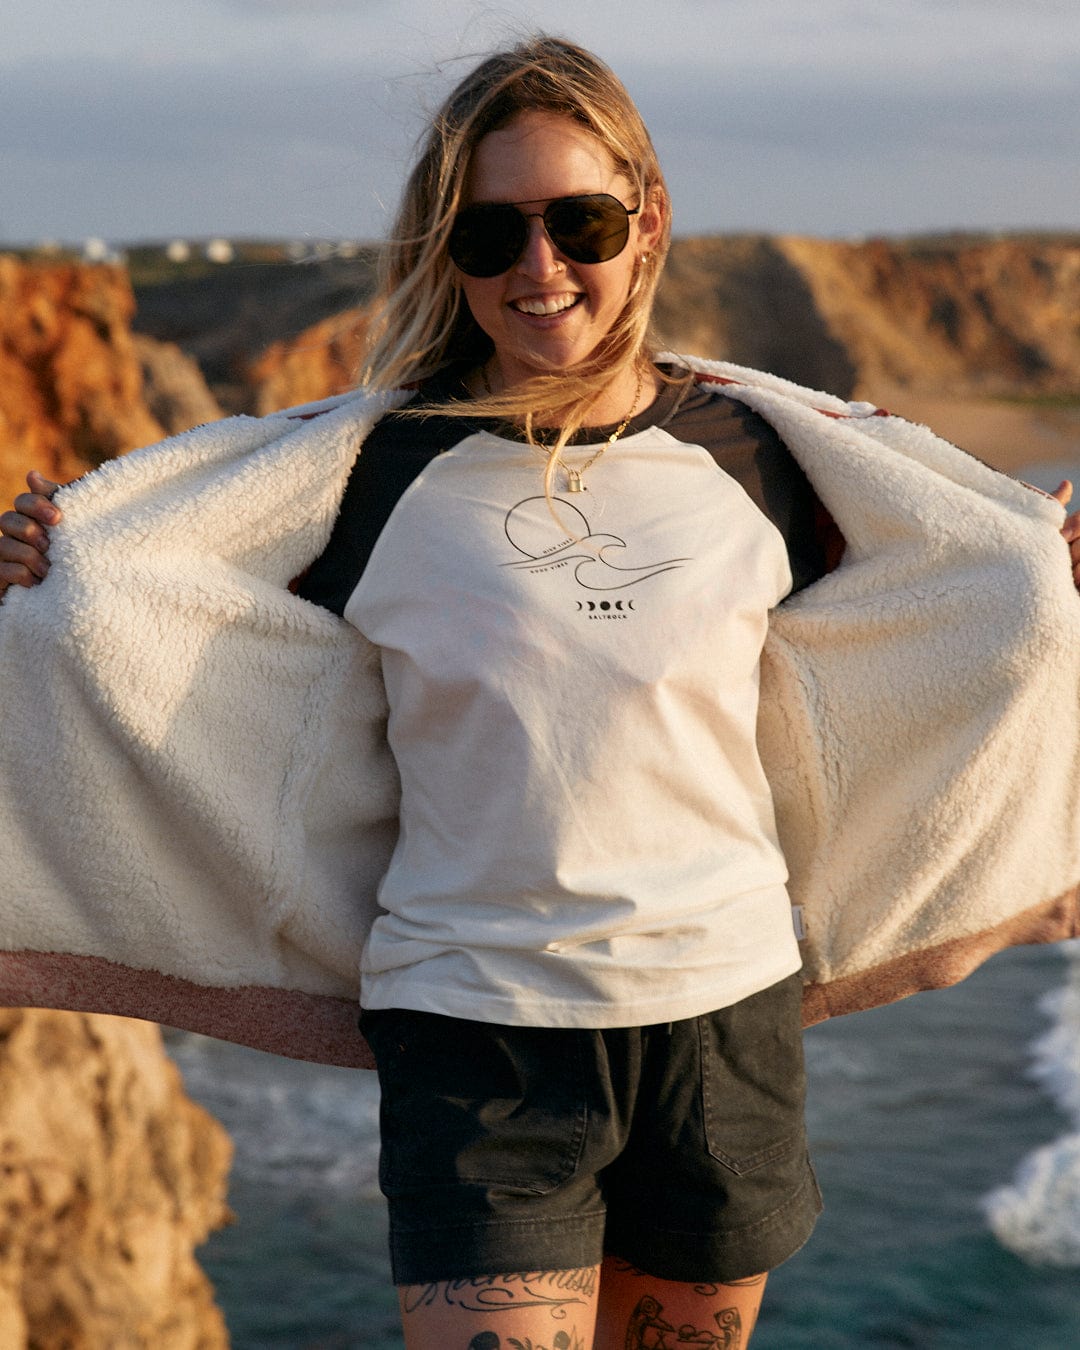 A woman in a Saltrock High Tides - Womens Raglan Long Sleeve T-Shirt - White and shorts is standing on a rock by the ocean.